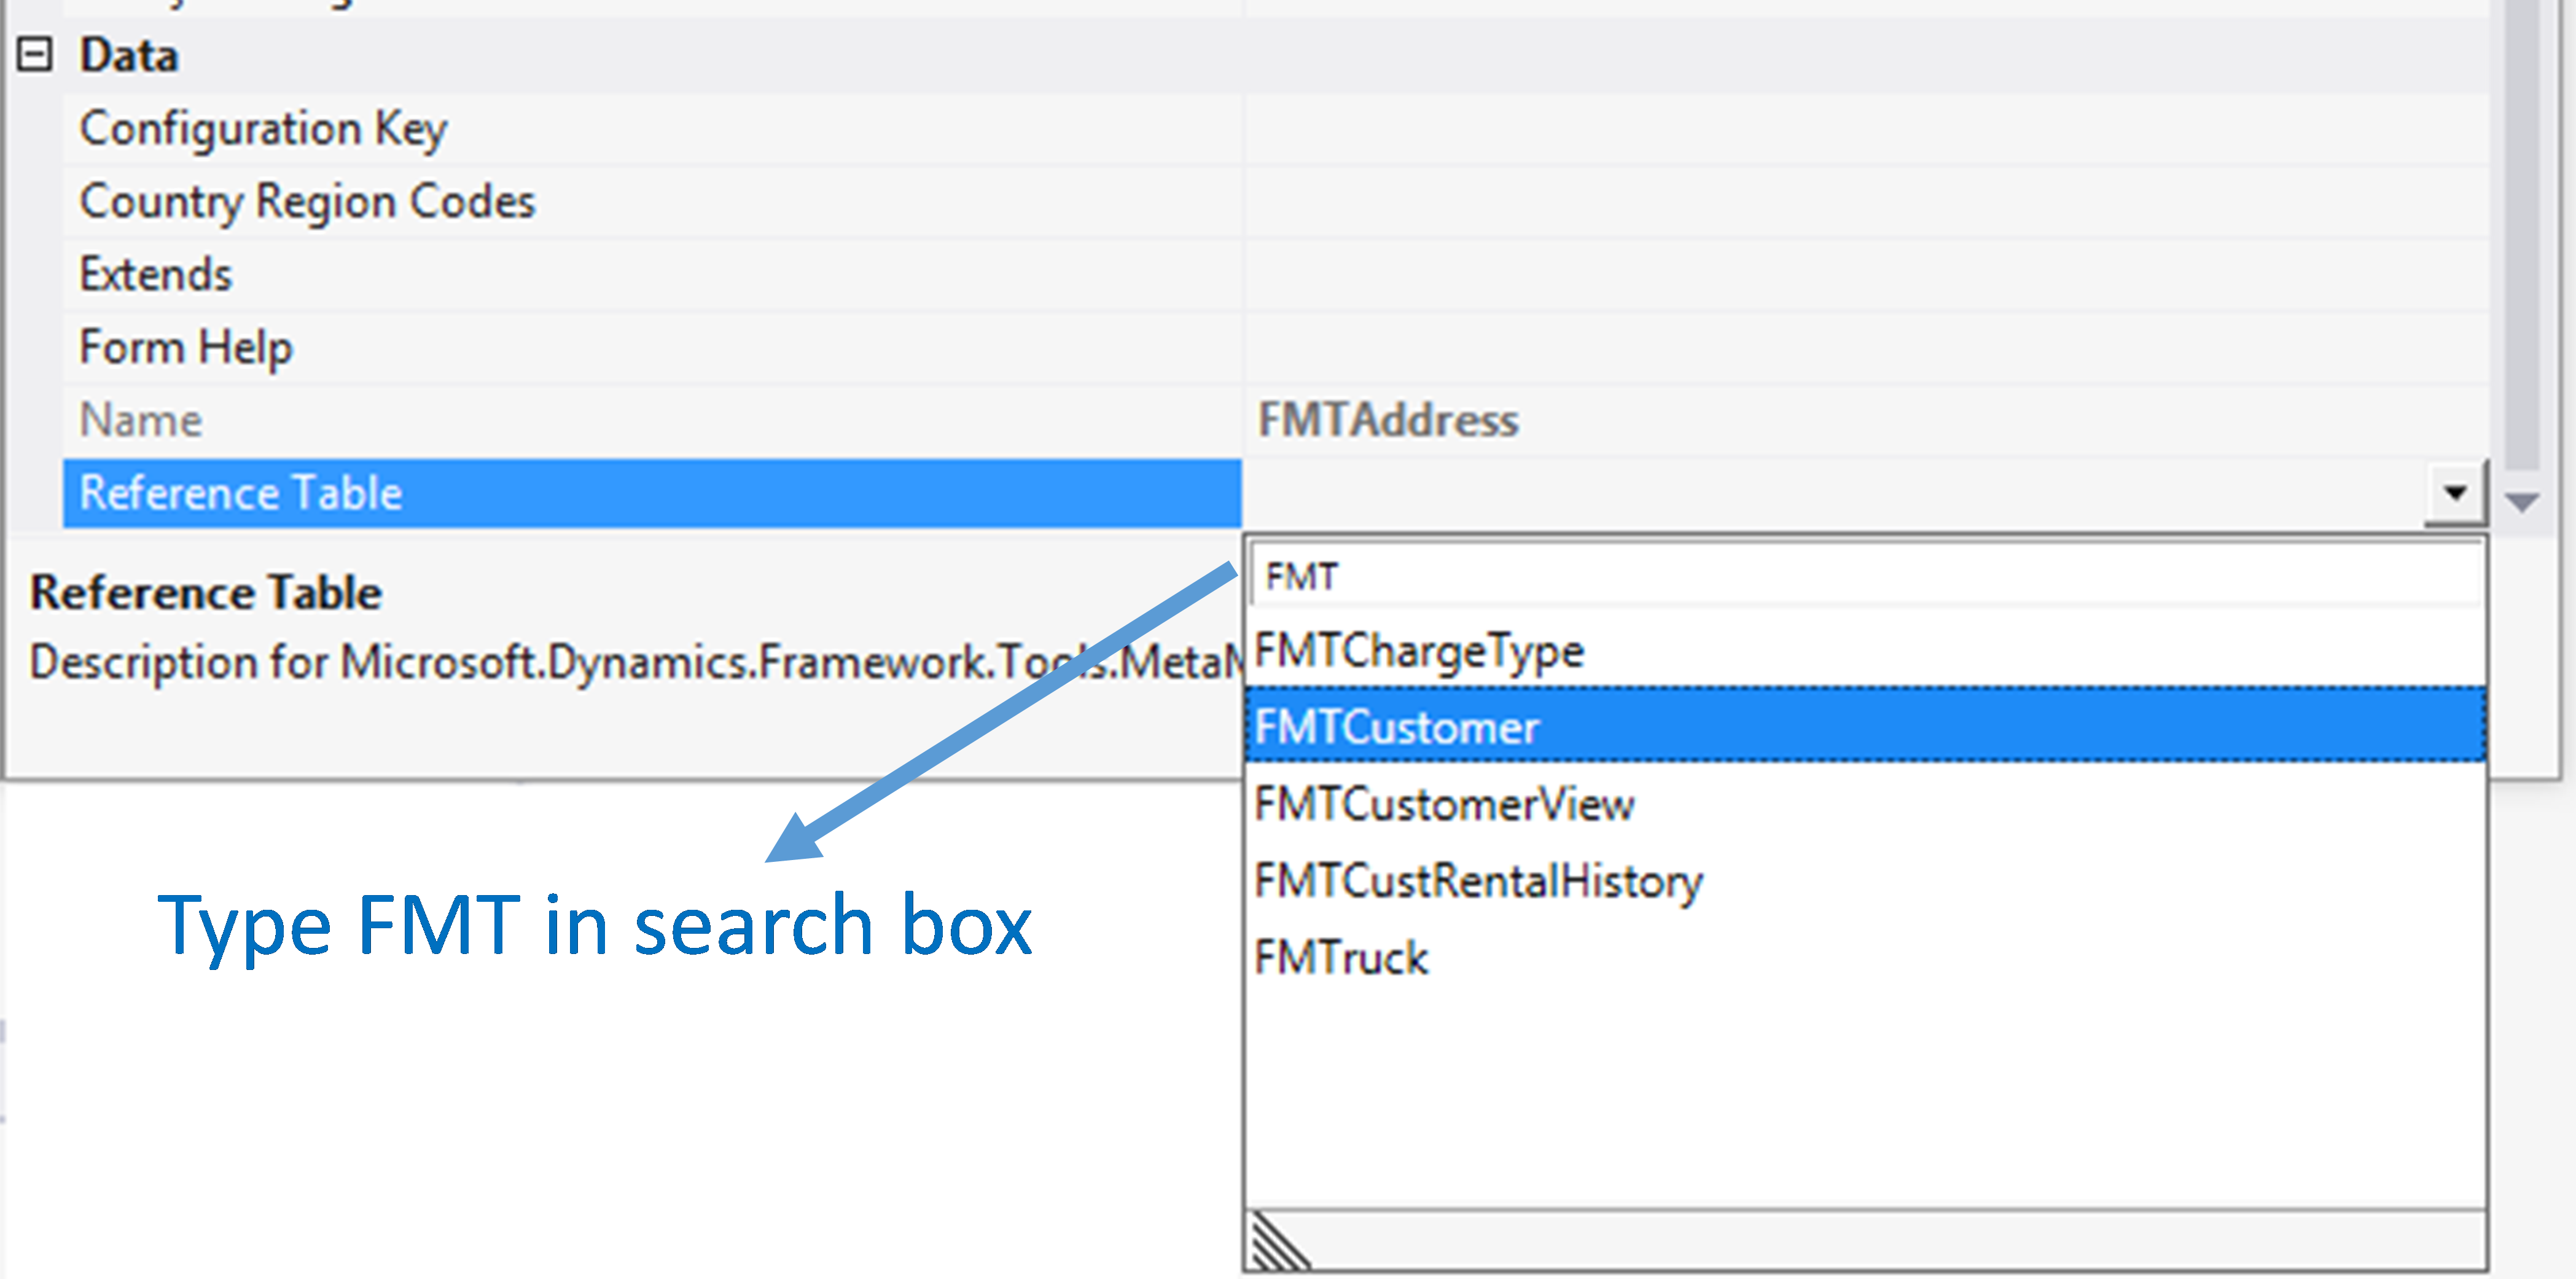 Update the FMTAddress EDT in the Properties window.